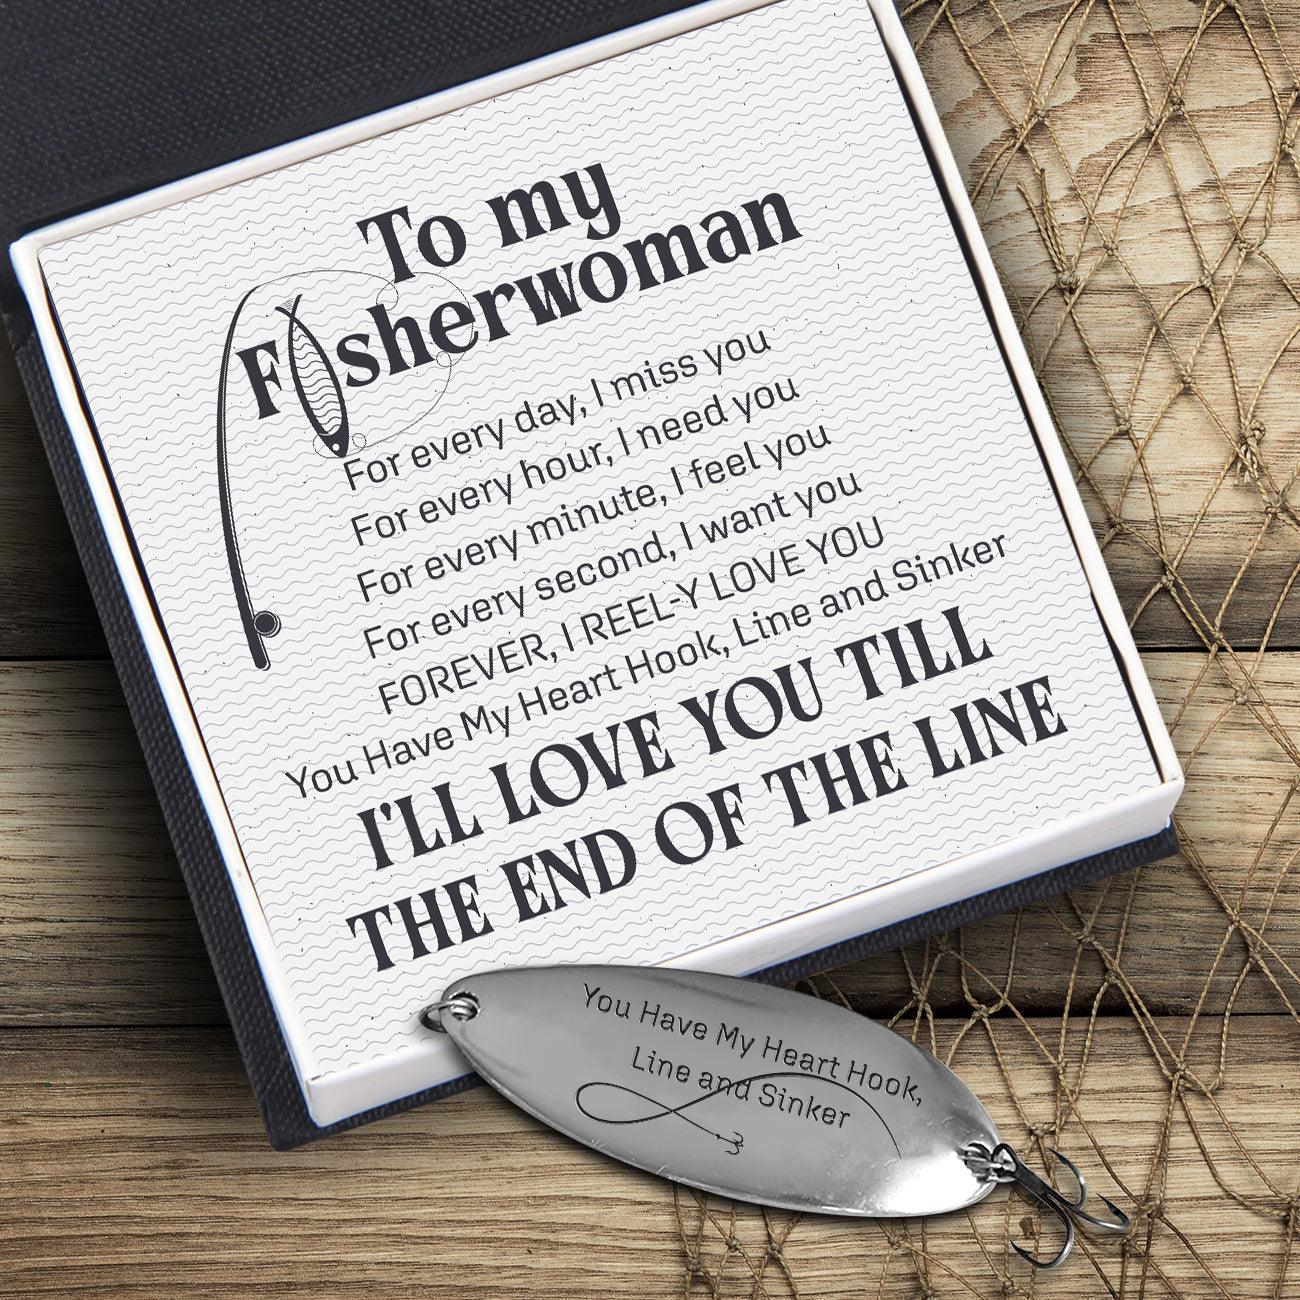 Fishing Lure - Fishing - To My Fisherwoman - I Reel-y Love You - Augfb13002 - Gifts Holder